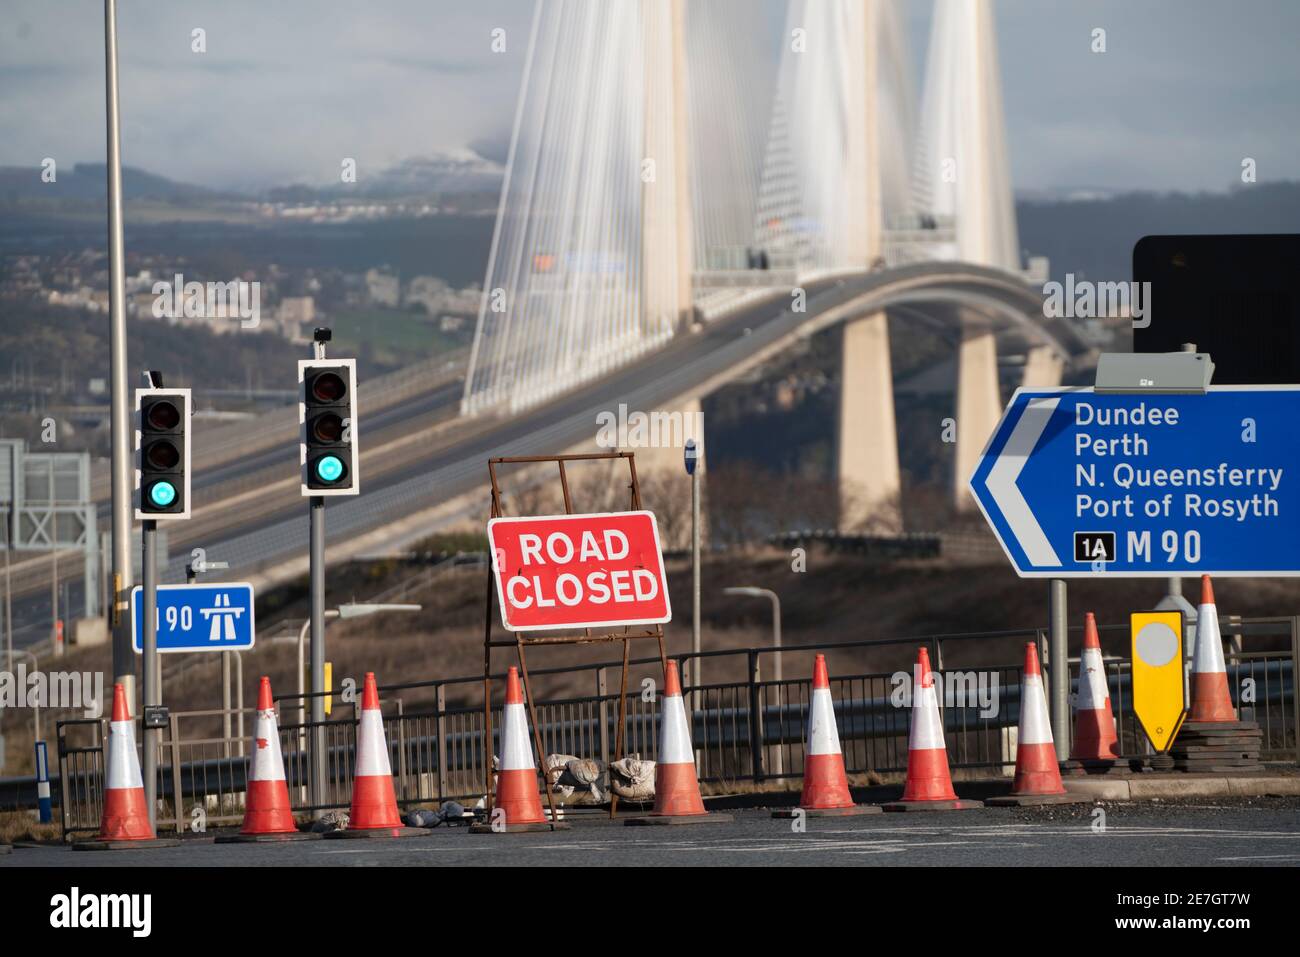 South Queensferry, Scotland, UK. 30 January 2021.  Queensferry Crossing bridge closed and Forth Road Bridge opened to all traffic this morning as temporary traffic diversion experiment is carried out. Highway operators are investigating the feasibility of diverting traffic from M90 from Queensferry Crossing onto the Forth Road Bridge at times when the Queensferry Crossing has to close because of ice on the cables for example. Extensive traffic management works are required however because no direct traffic access points were constructed between carriageways on each bridge. Pic; M90 motorway is Stock Photo